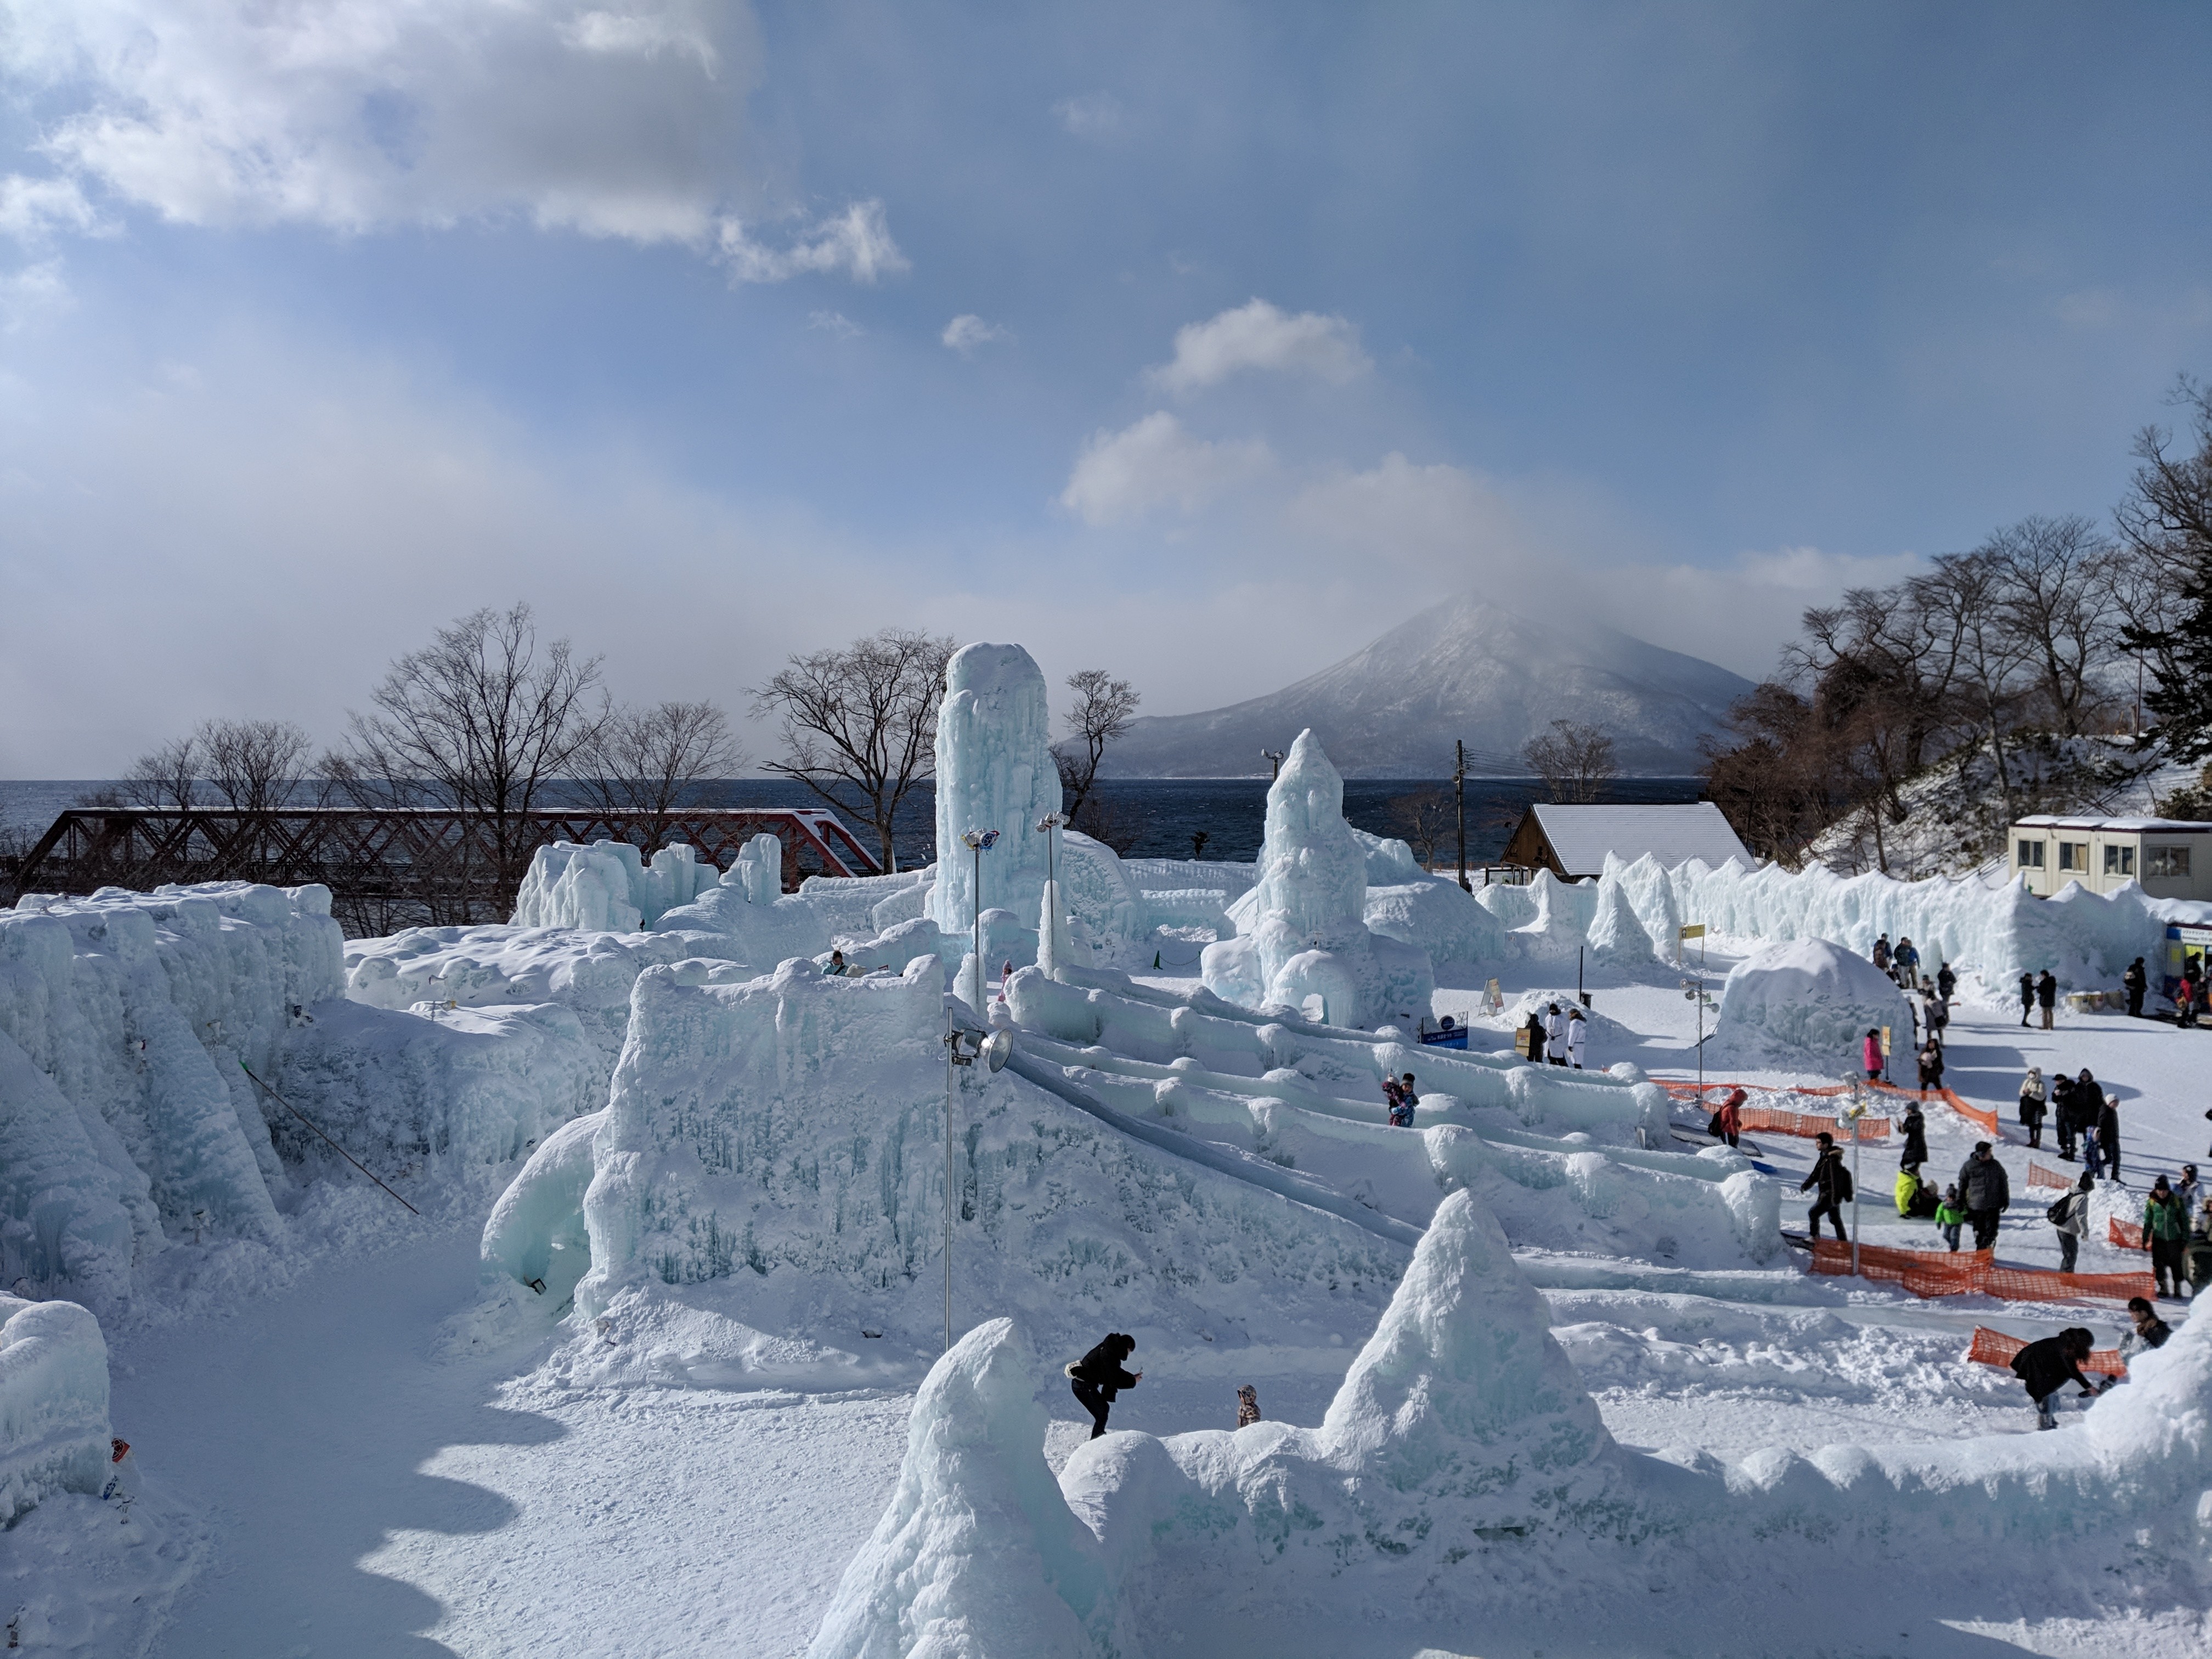 The ice festival with Mount Eniwa in the background